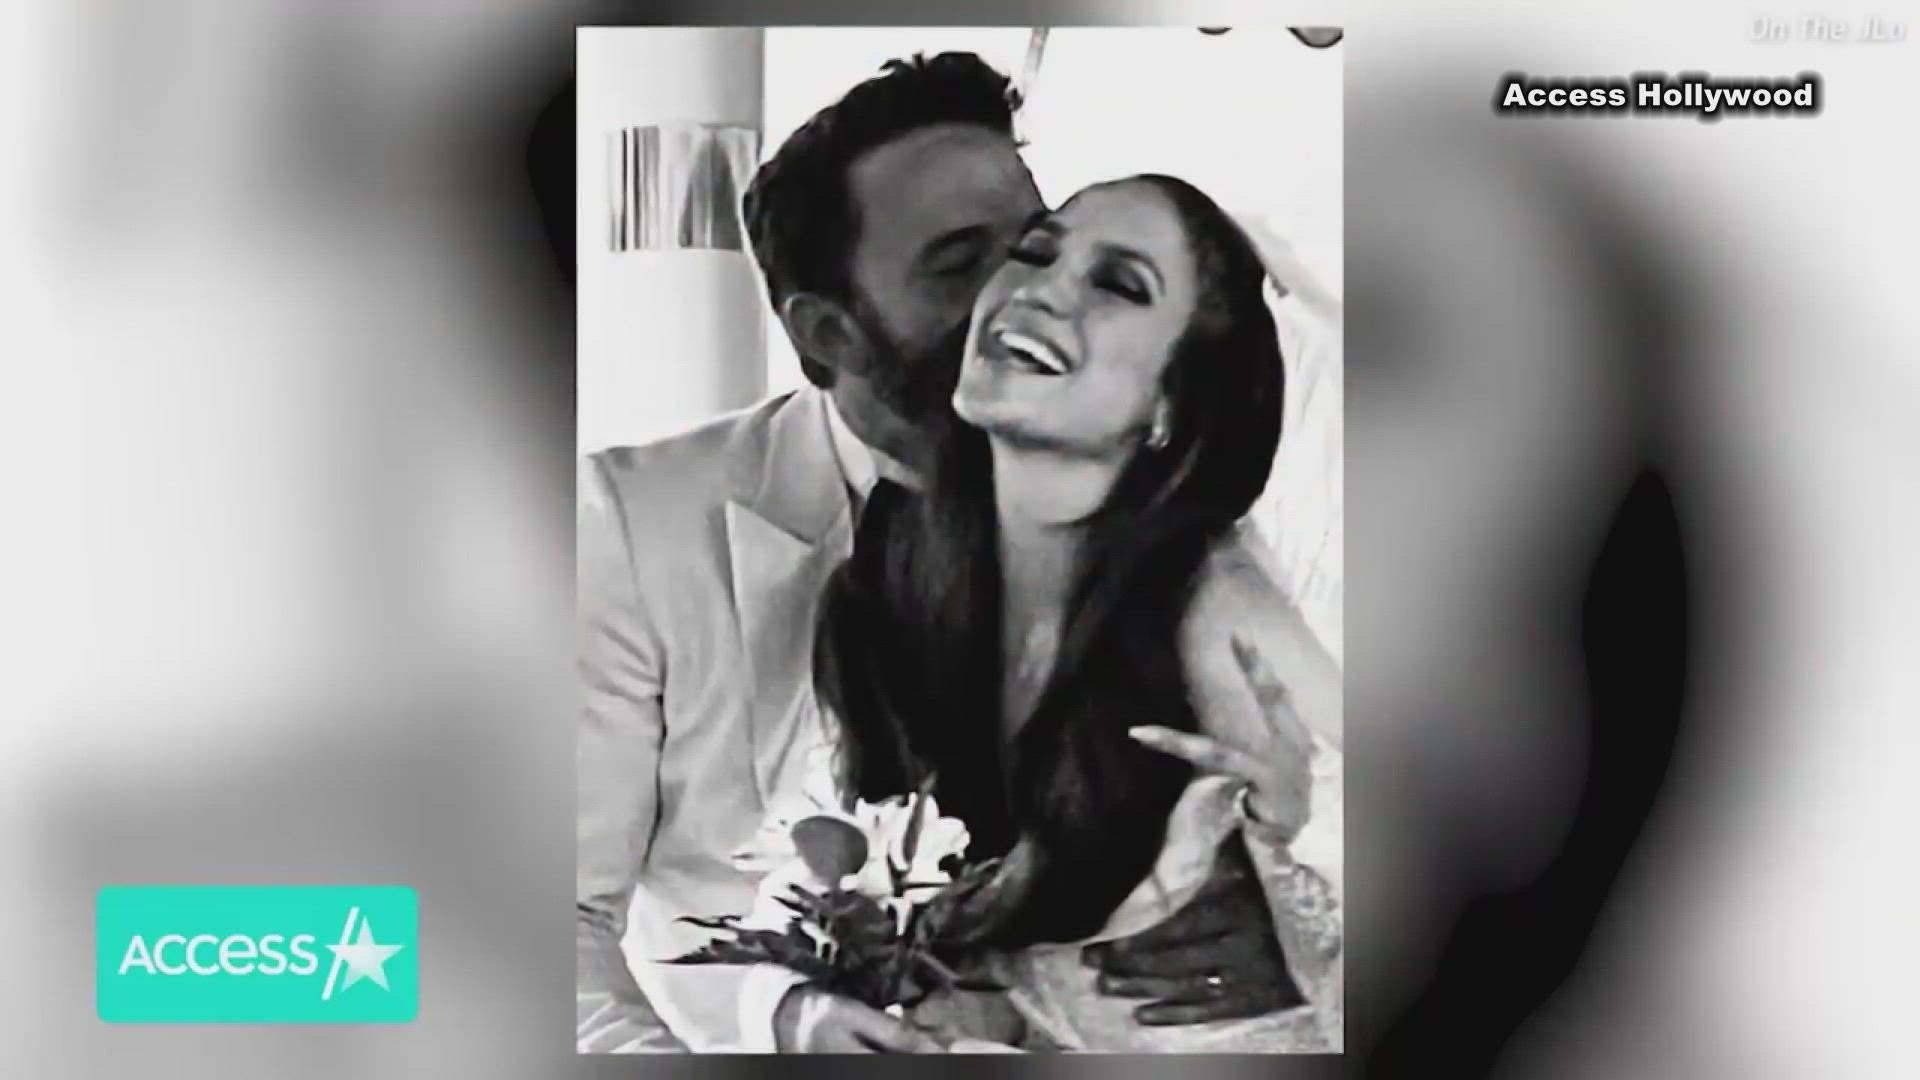 Bennifer forever! Ben Affleck & J.Lo tie the knot in a wedding 20 years in the making, a couple restaurants have a sign war and one Batman's suit is for sale